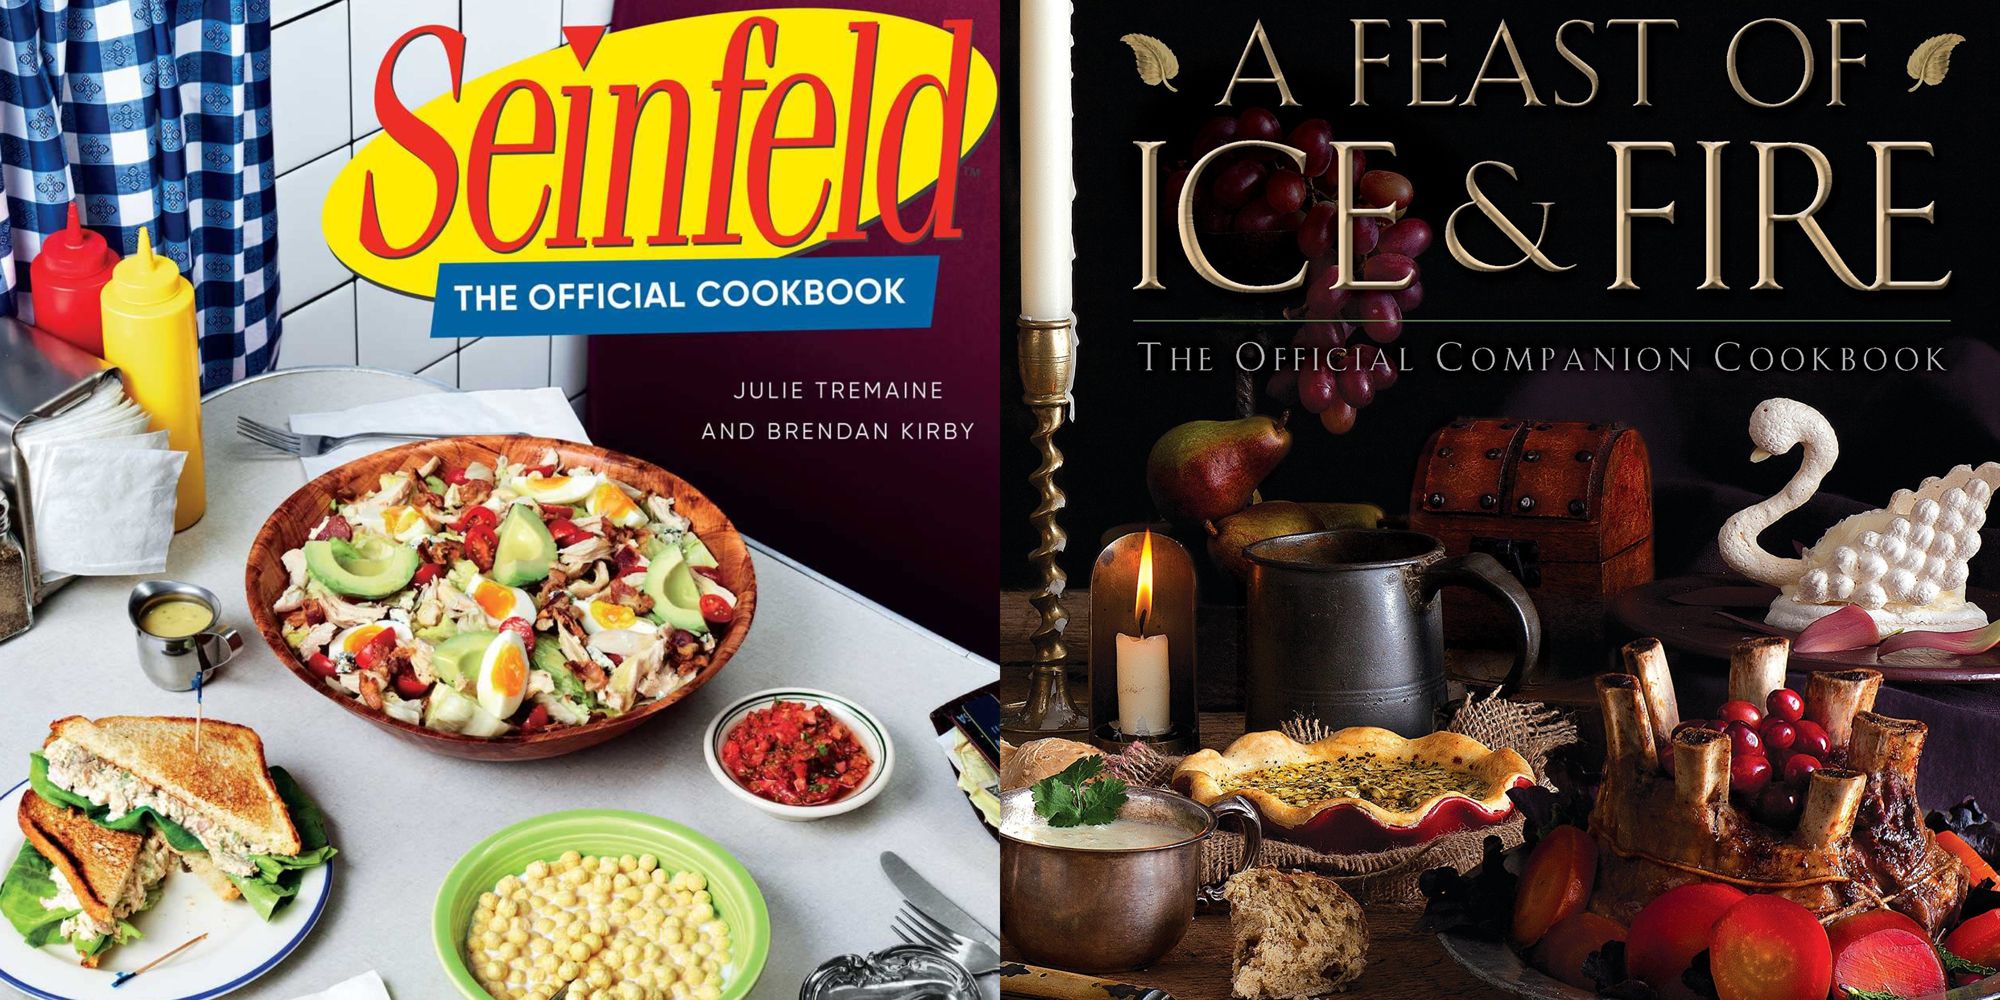 official cookbooks for seinfeld and game of thrones